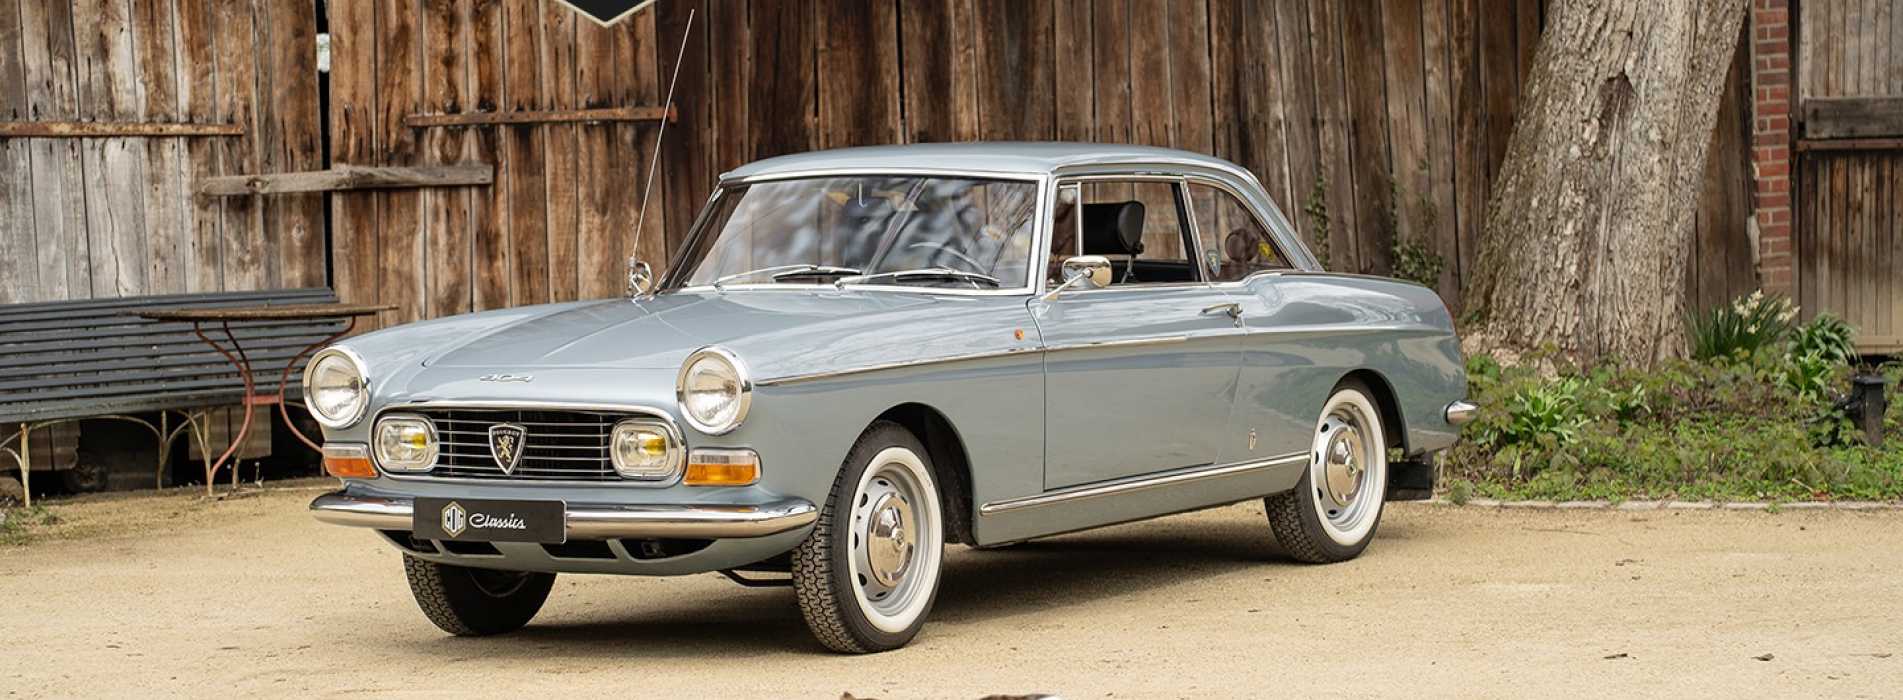 Peugeot 404 Coupe 0